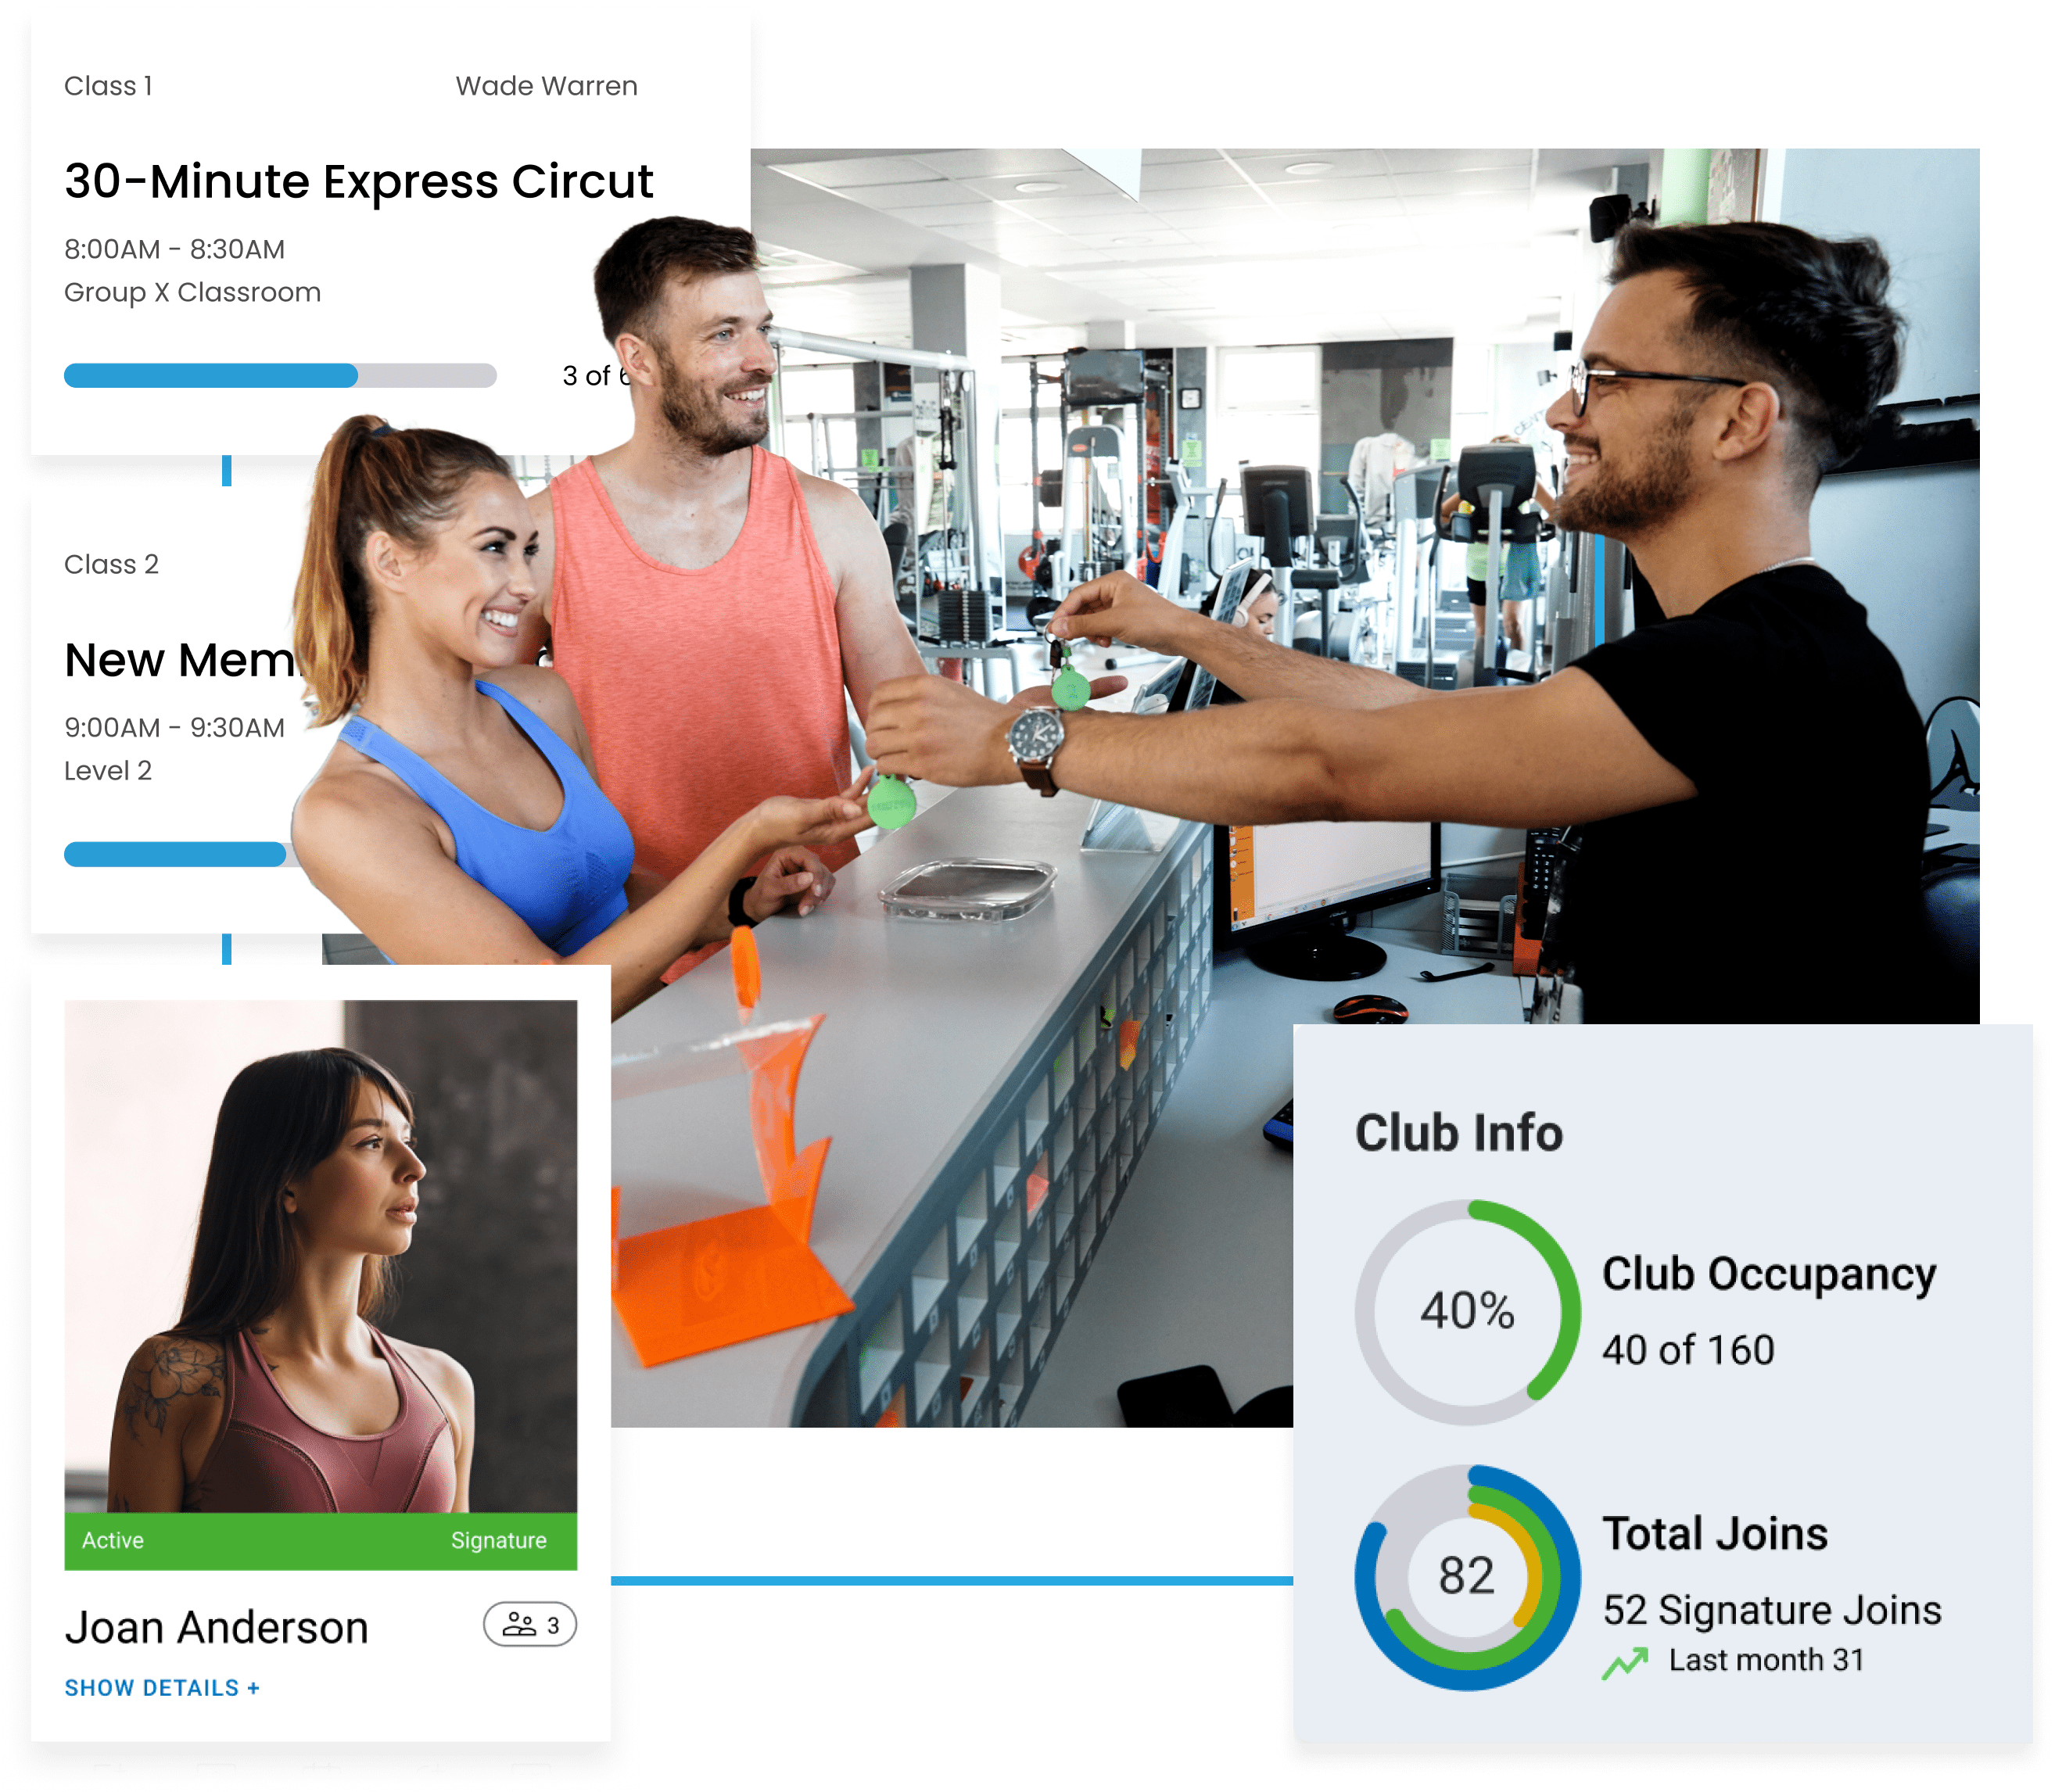 ABC Fitness gym and dashboard featuring graphs displaying workout plans, exercise routines, and performance metrics for tracking fitness progress.